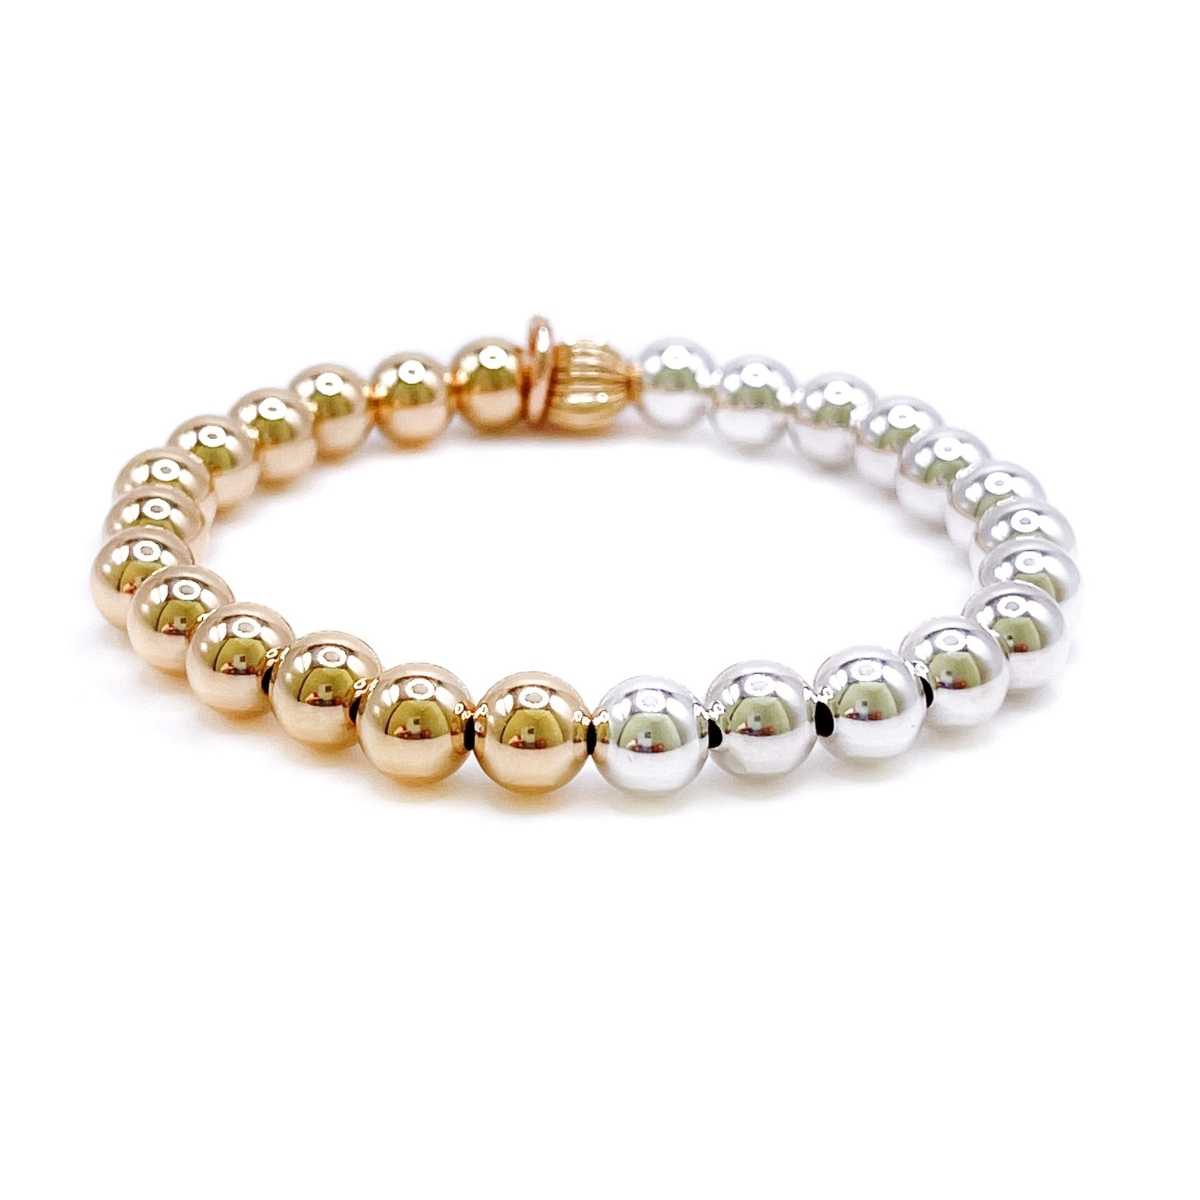 Non-Tarnishing Gold Filled, 7mm Gold Ball and Sterling Silver Bracelet - Gold  silver